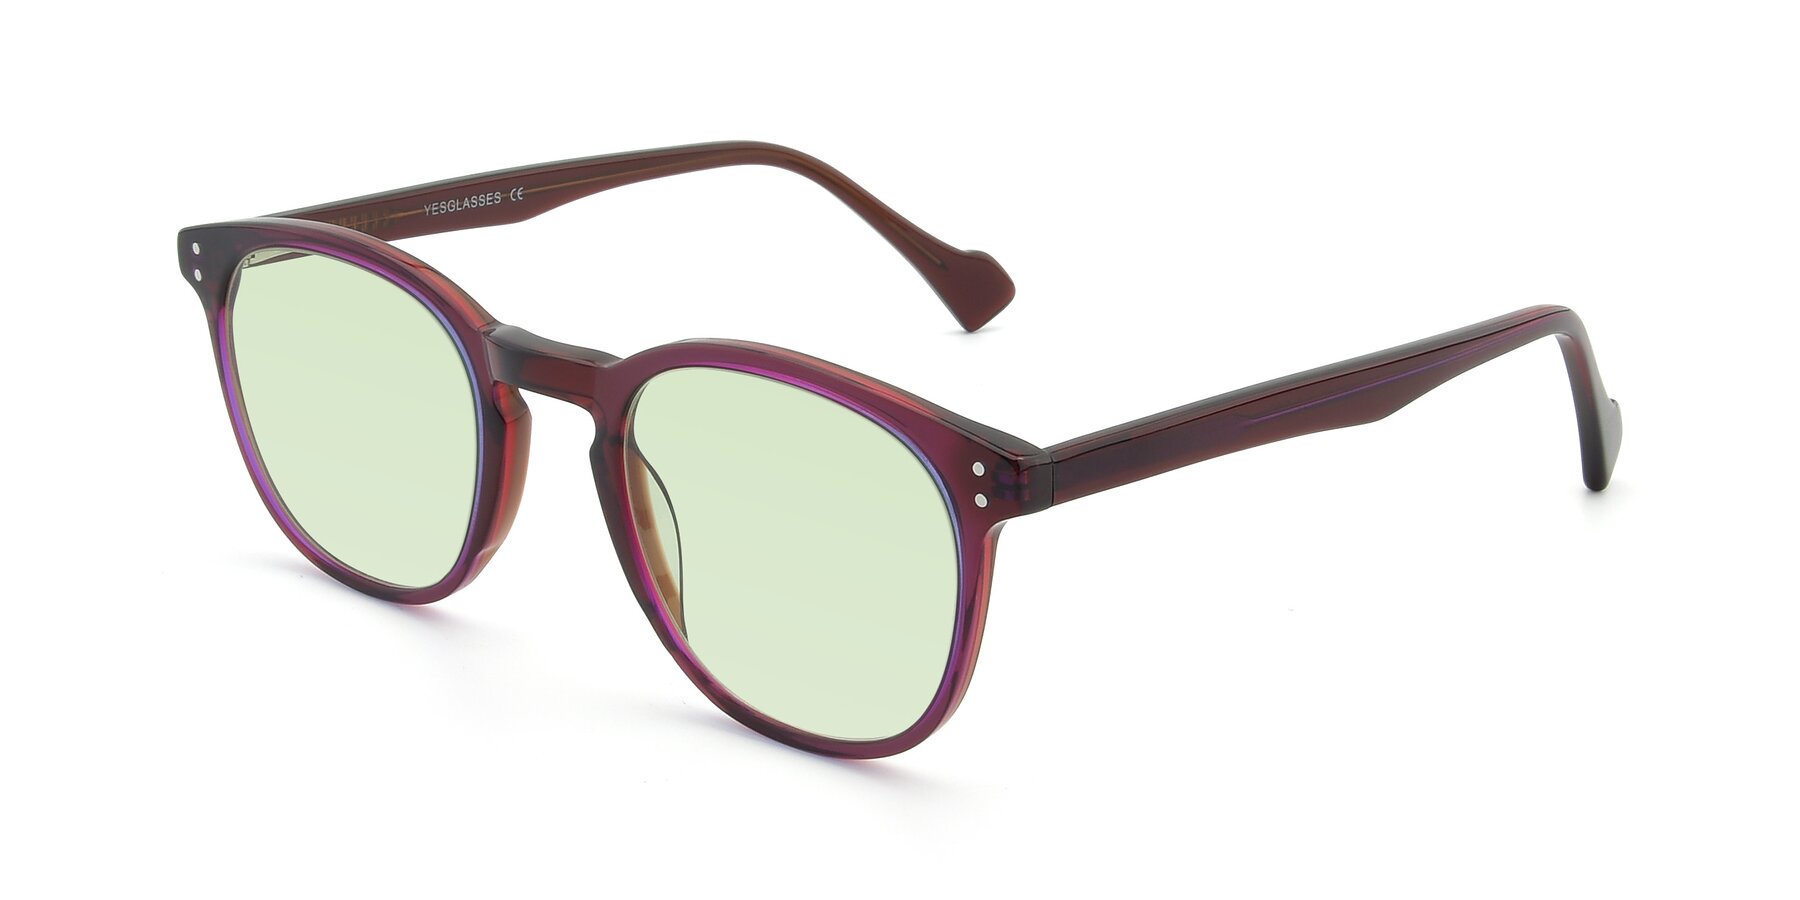 Angle of 17293 in Violet with Light Green Tinted Lenses